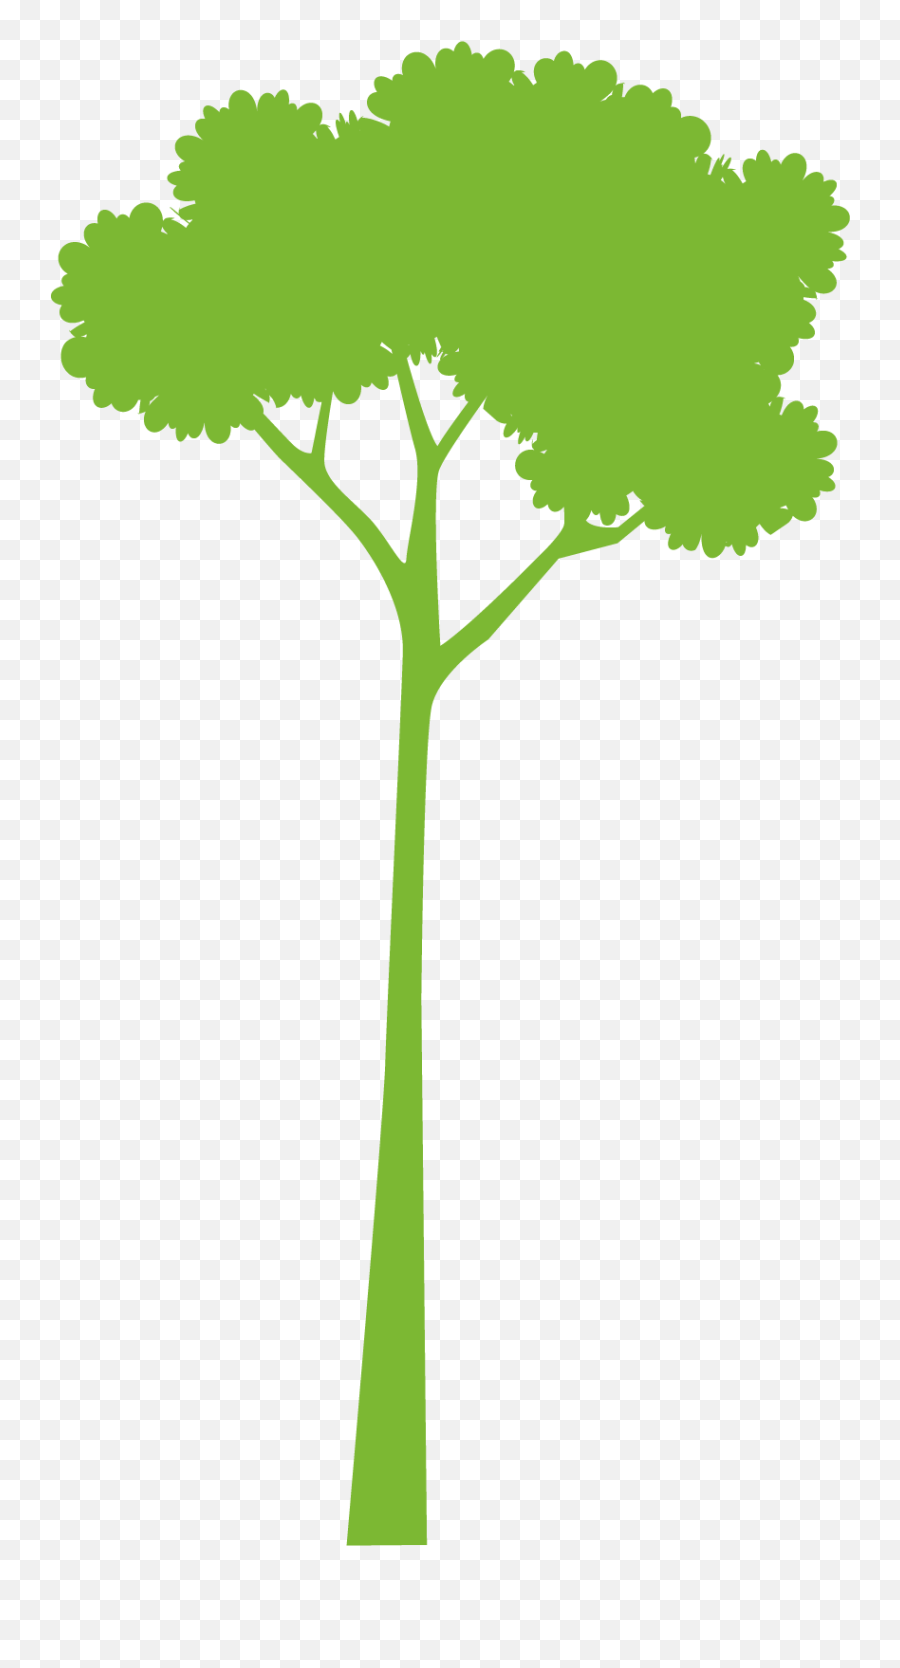 Kjs We Are Direct Mail - Weu0027re Proud To Carbon Capture All Emoji,Woodland Tree Clipart